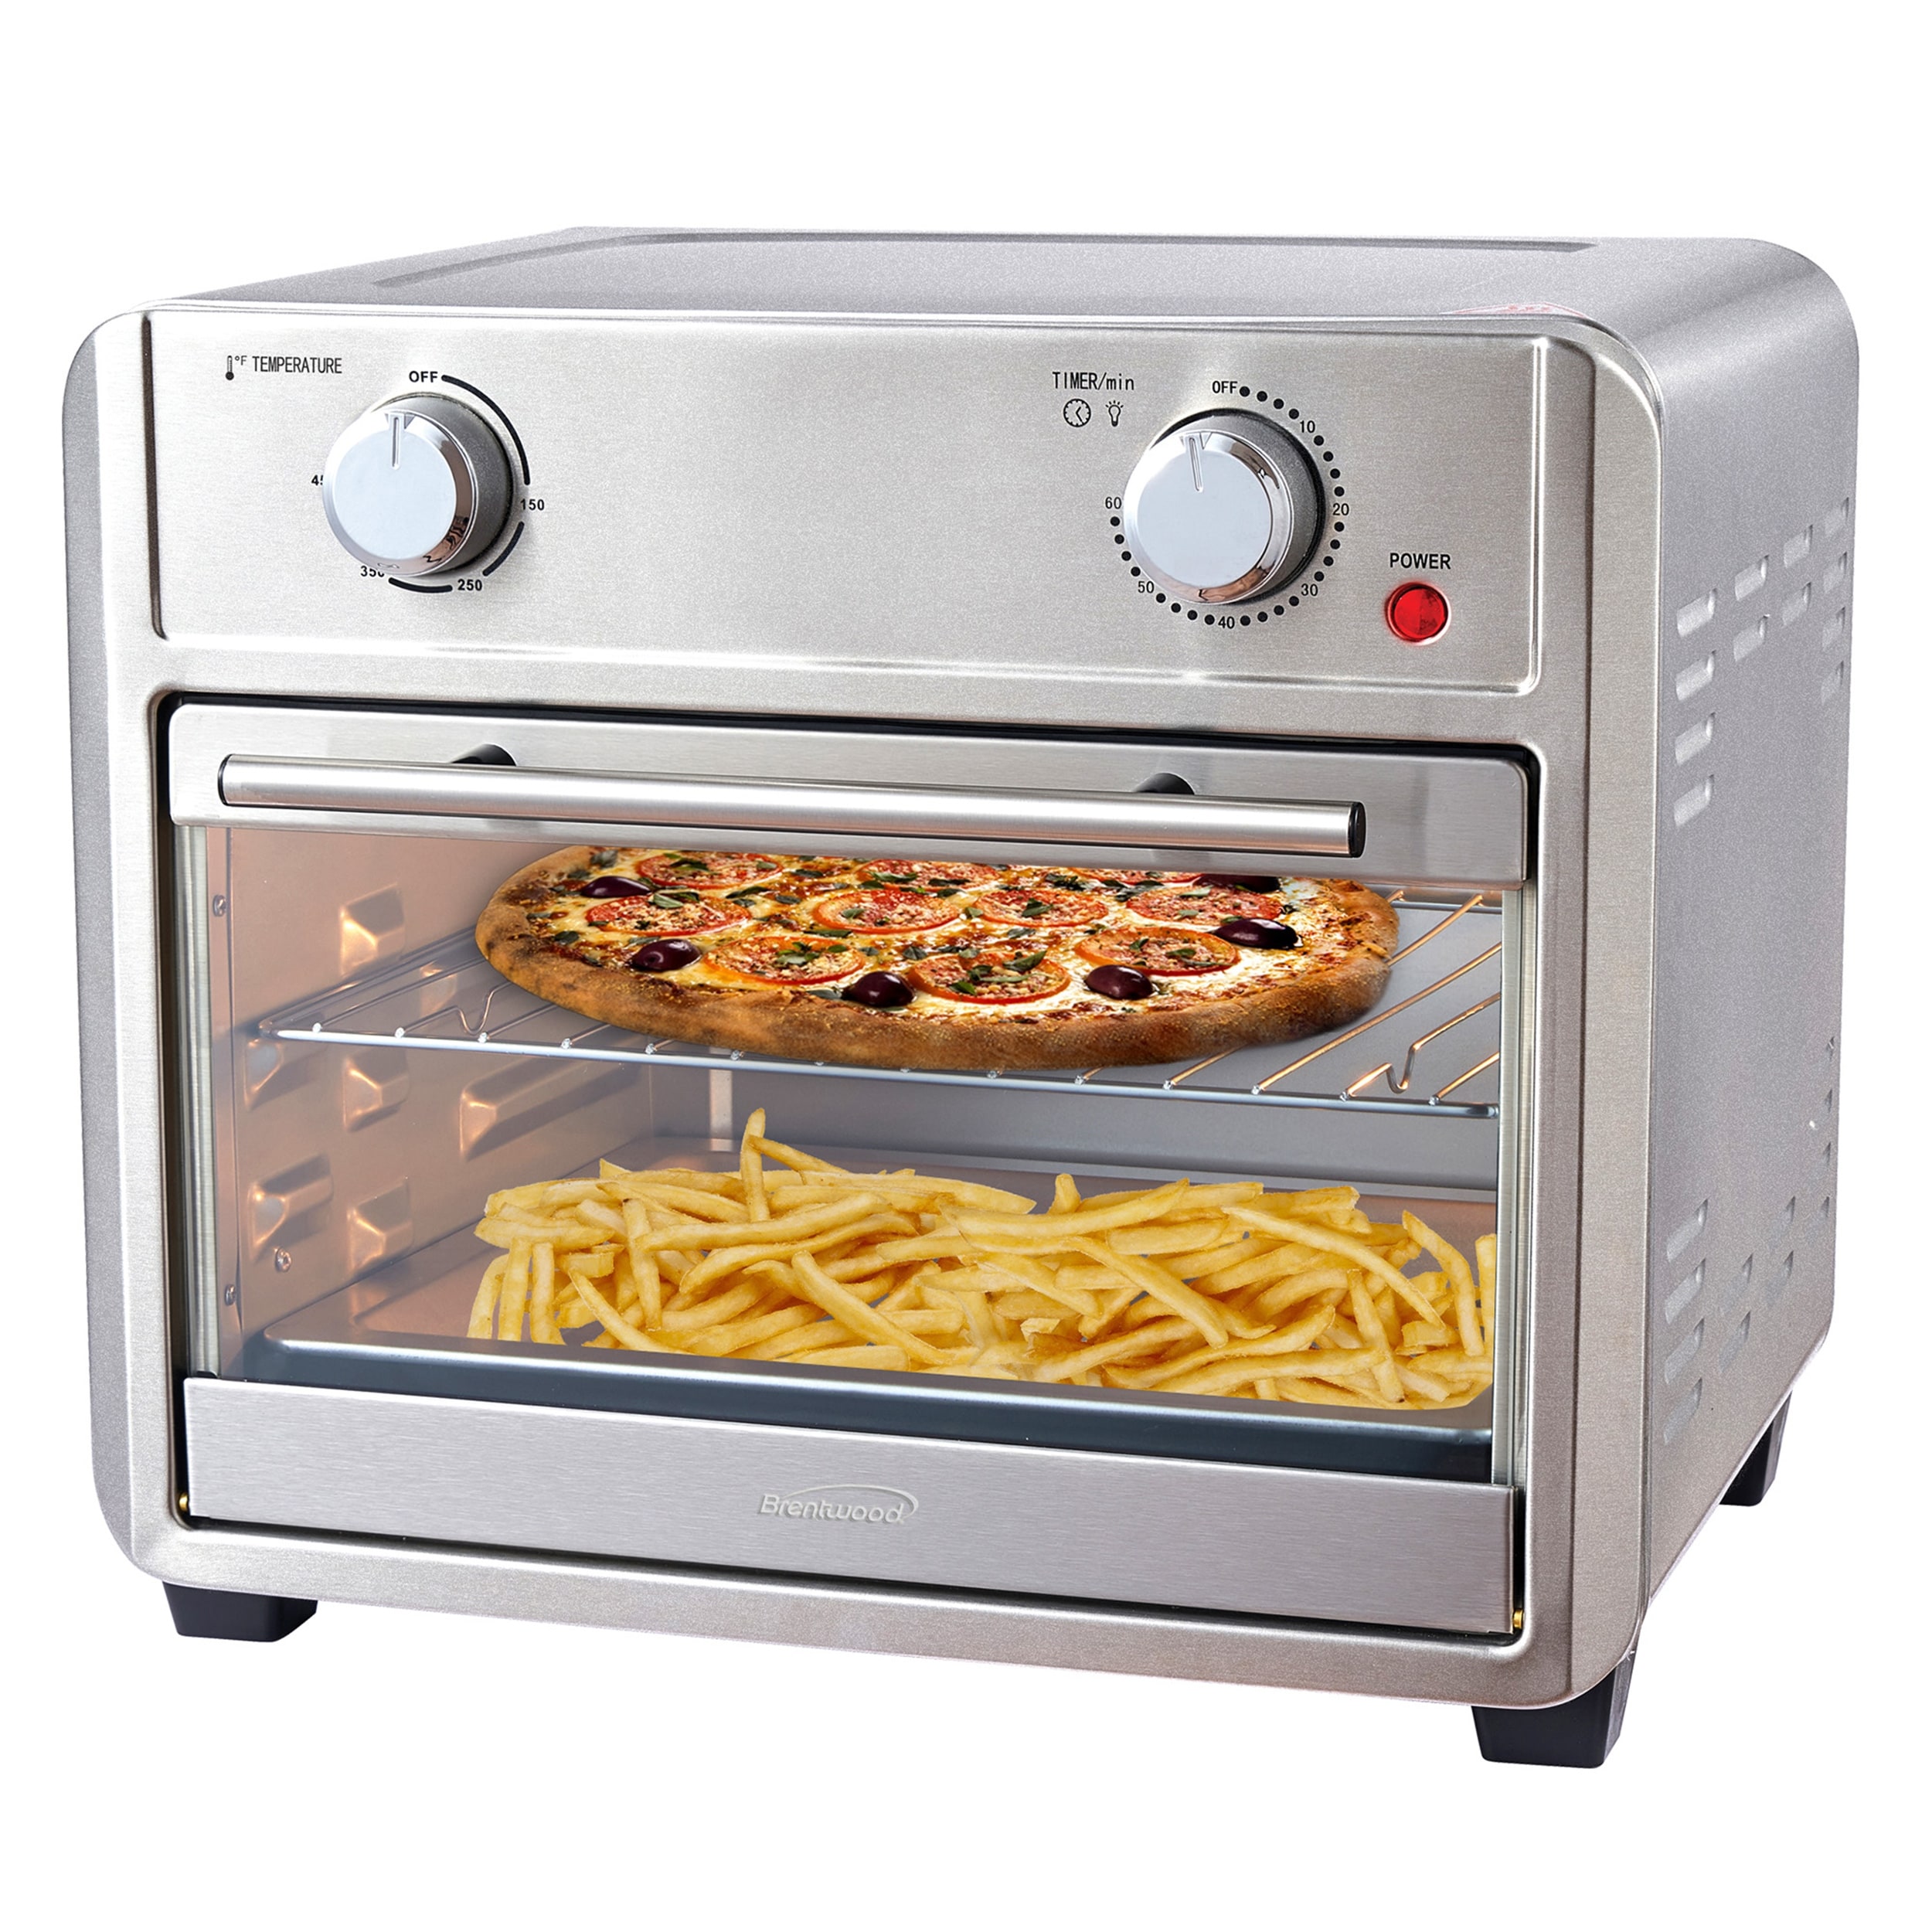 https://ak1.ostkcdn.com/images/products/is/images/direct/8ec9490e31998f8f3d0ddb16be417c9e7f4487ea/Brentwood-1700-Watt-24-Quart-Convection-Air-Fryer-Toaster-Oven-in-Silver.jpg